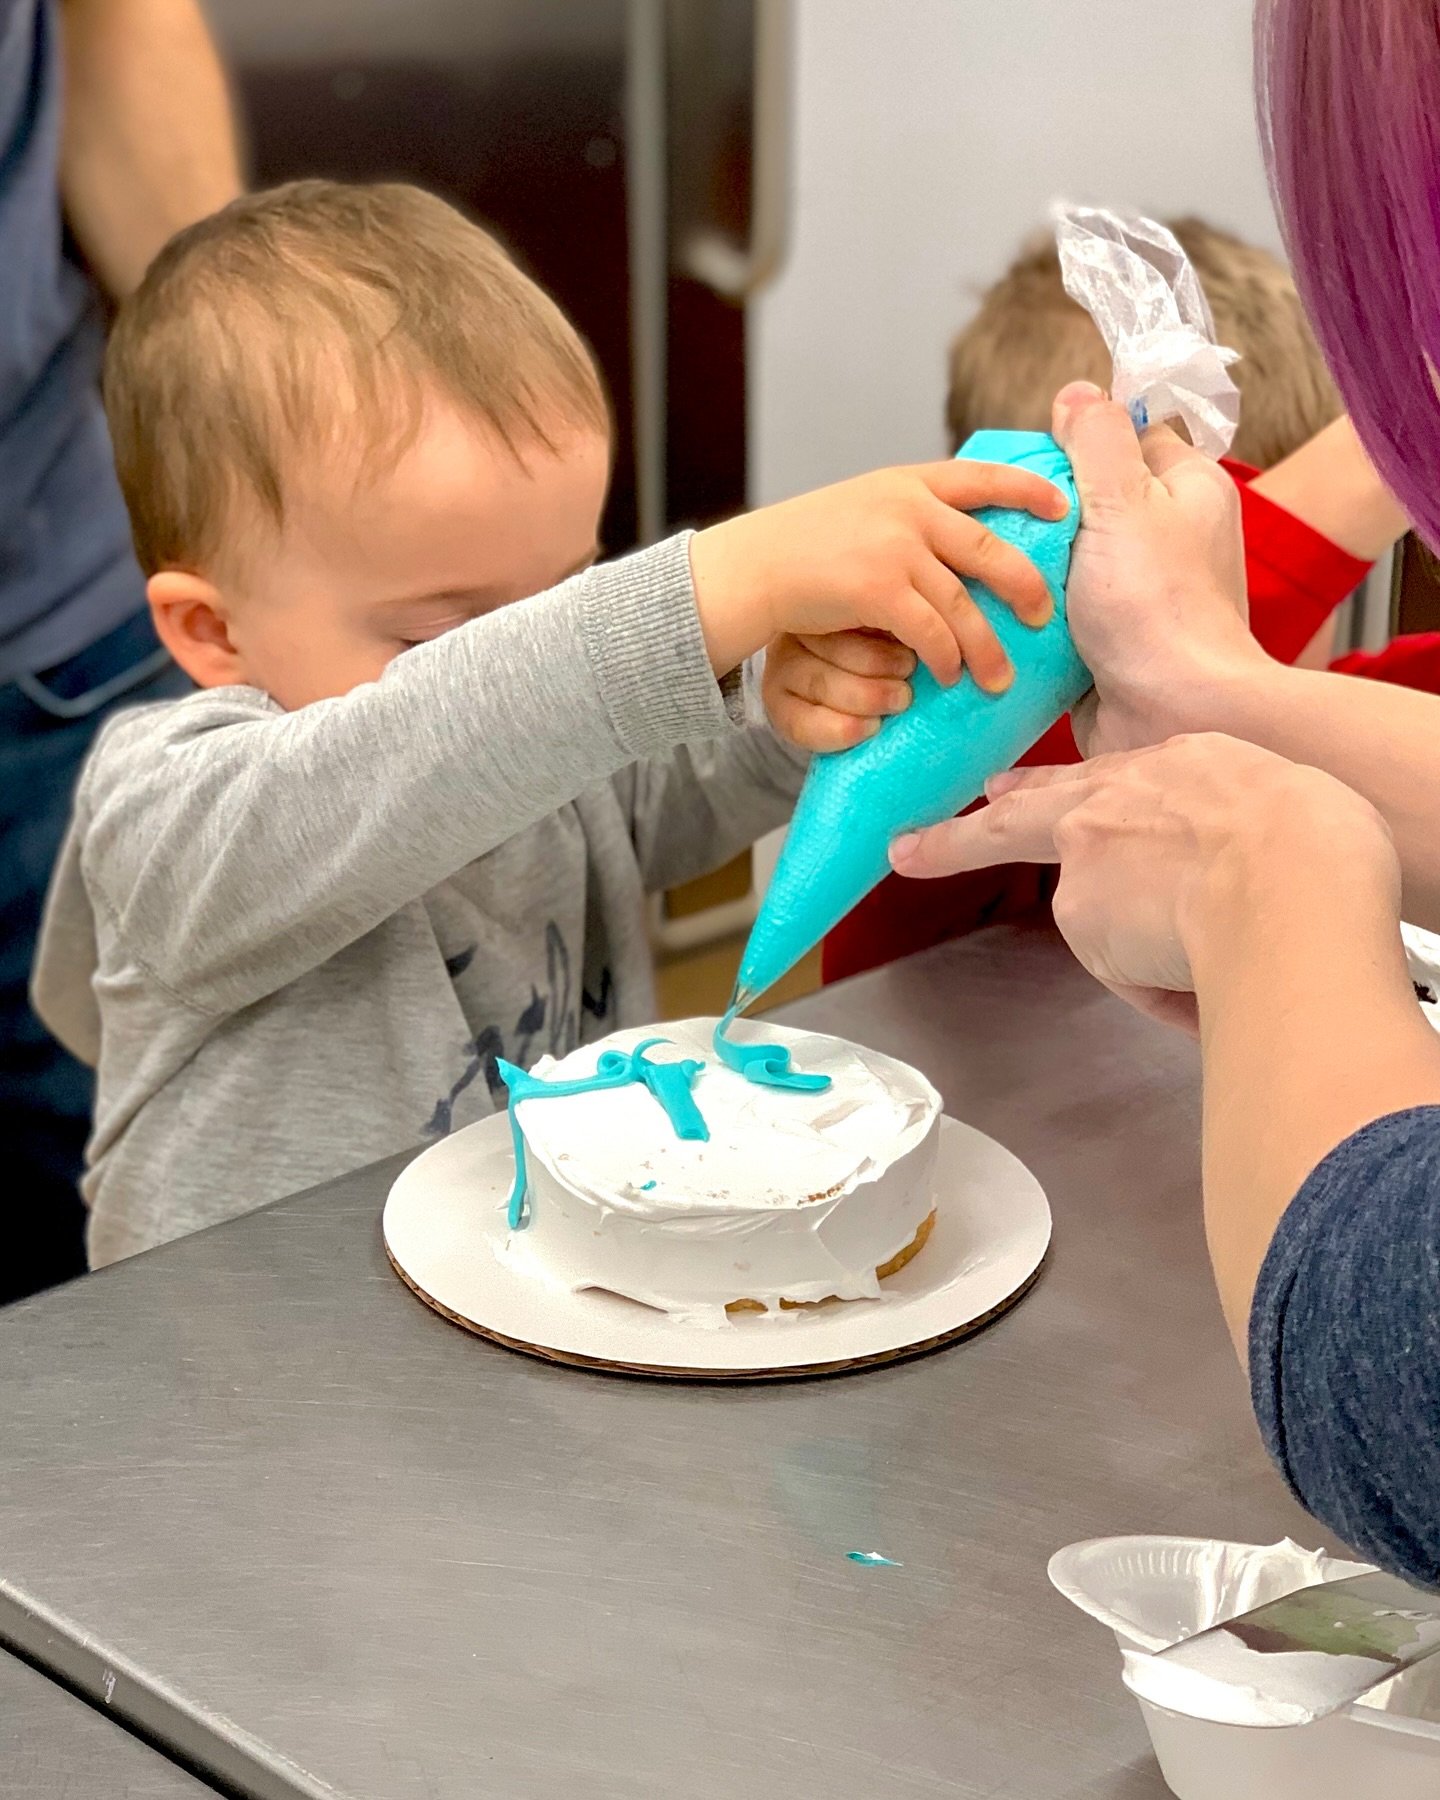 Let your little ones get creative while making a special cake just for mom🥰

Saturday May 11th, we&rsquo;re hosting our kid&rsquo;s cake decorating event for Mother&rsquo;s Day 🎂 You won&rsquo;t want to miss out on this opportunity to make some fun